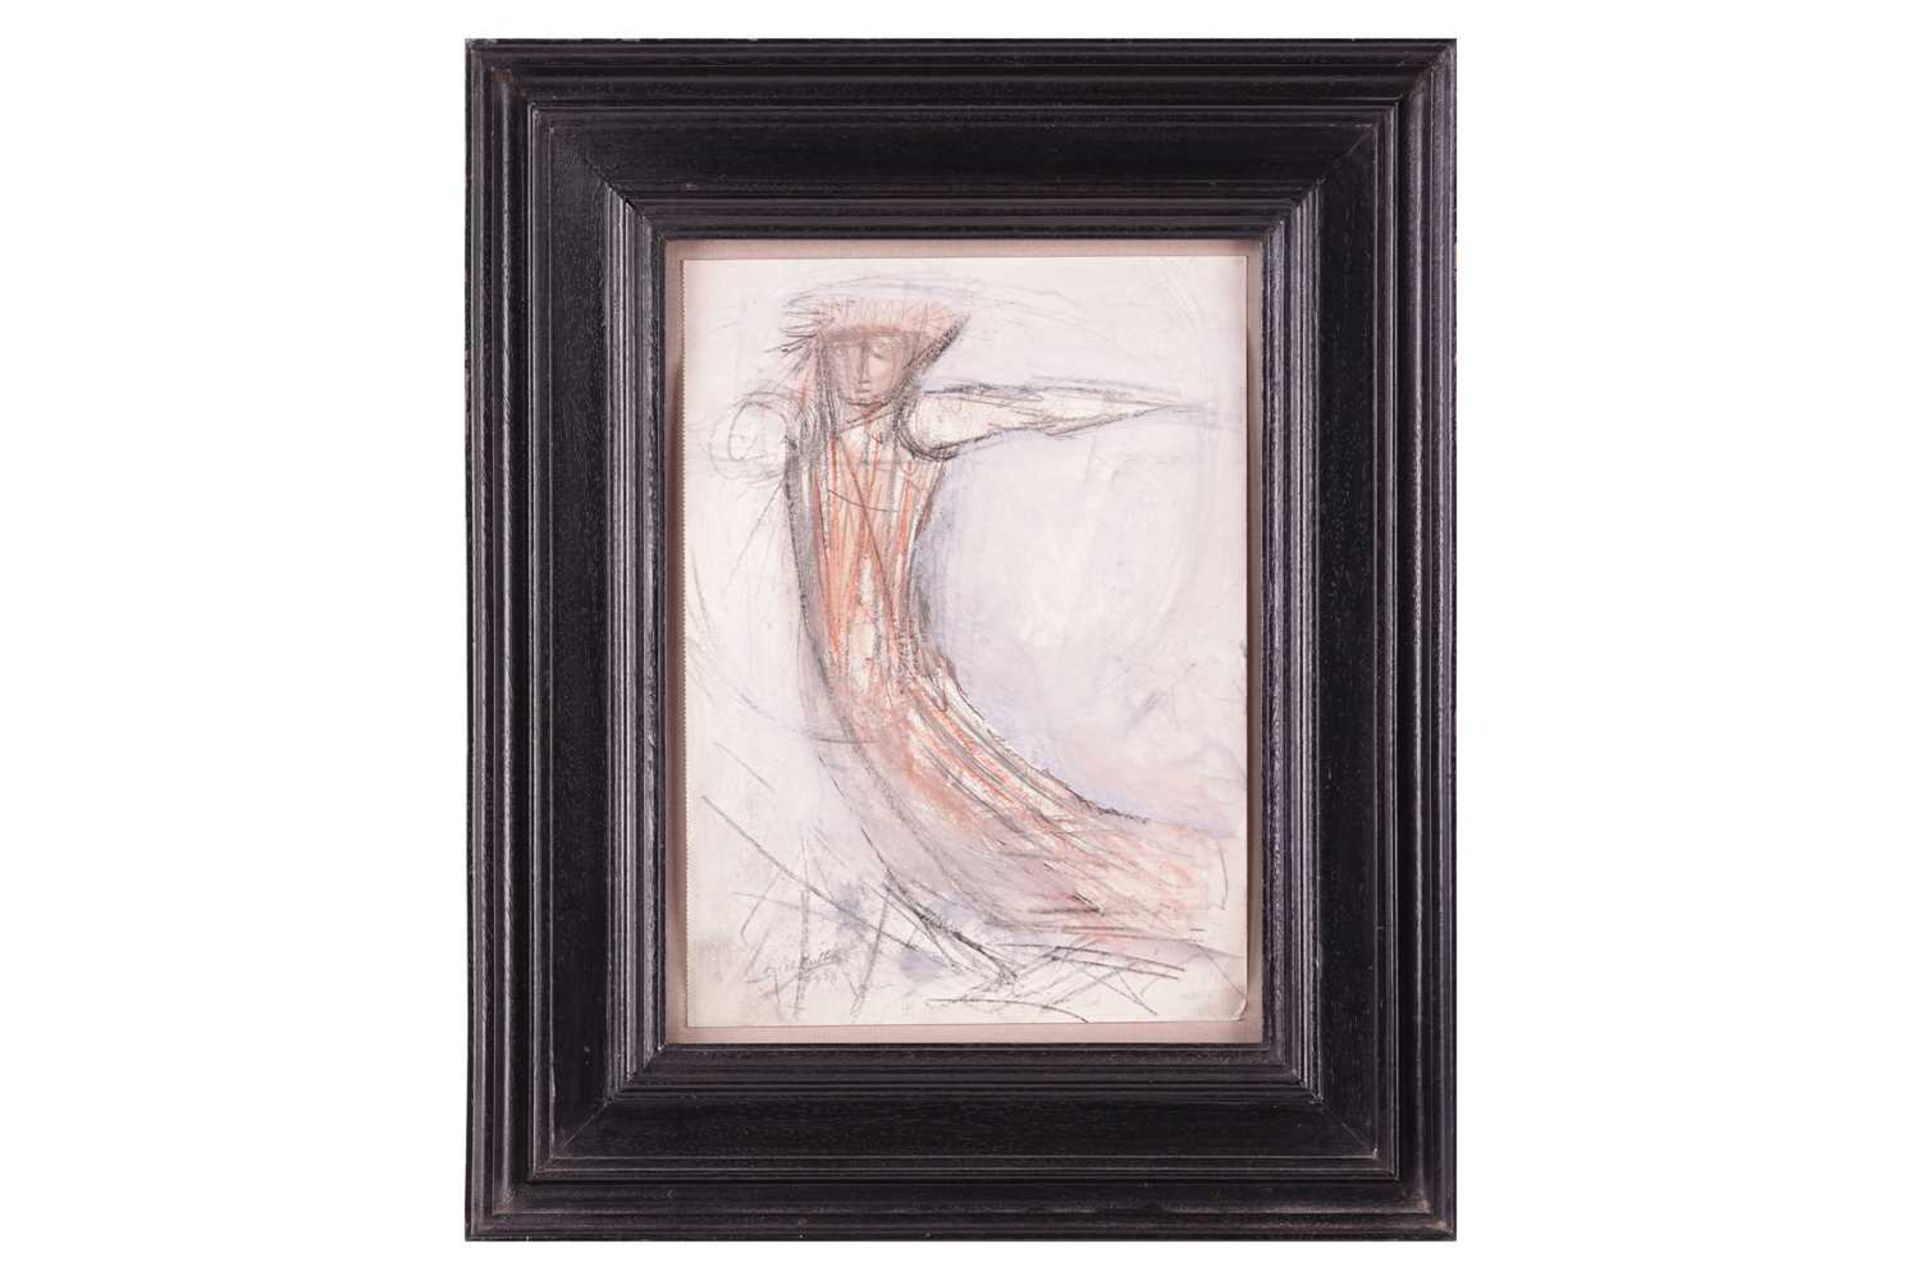 Cecil Collins (1908-1999), Sketch for the Resurrection of Christ, signed 'Cecil Collins' and dated 1